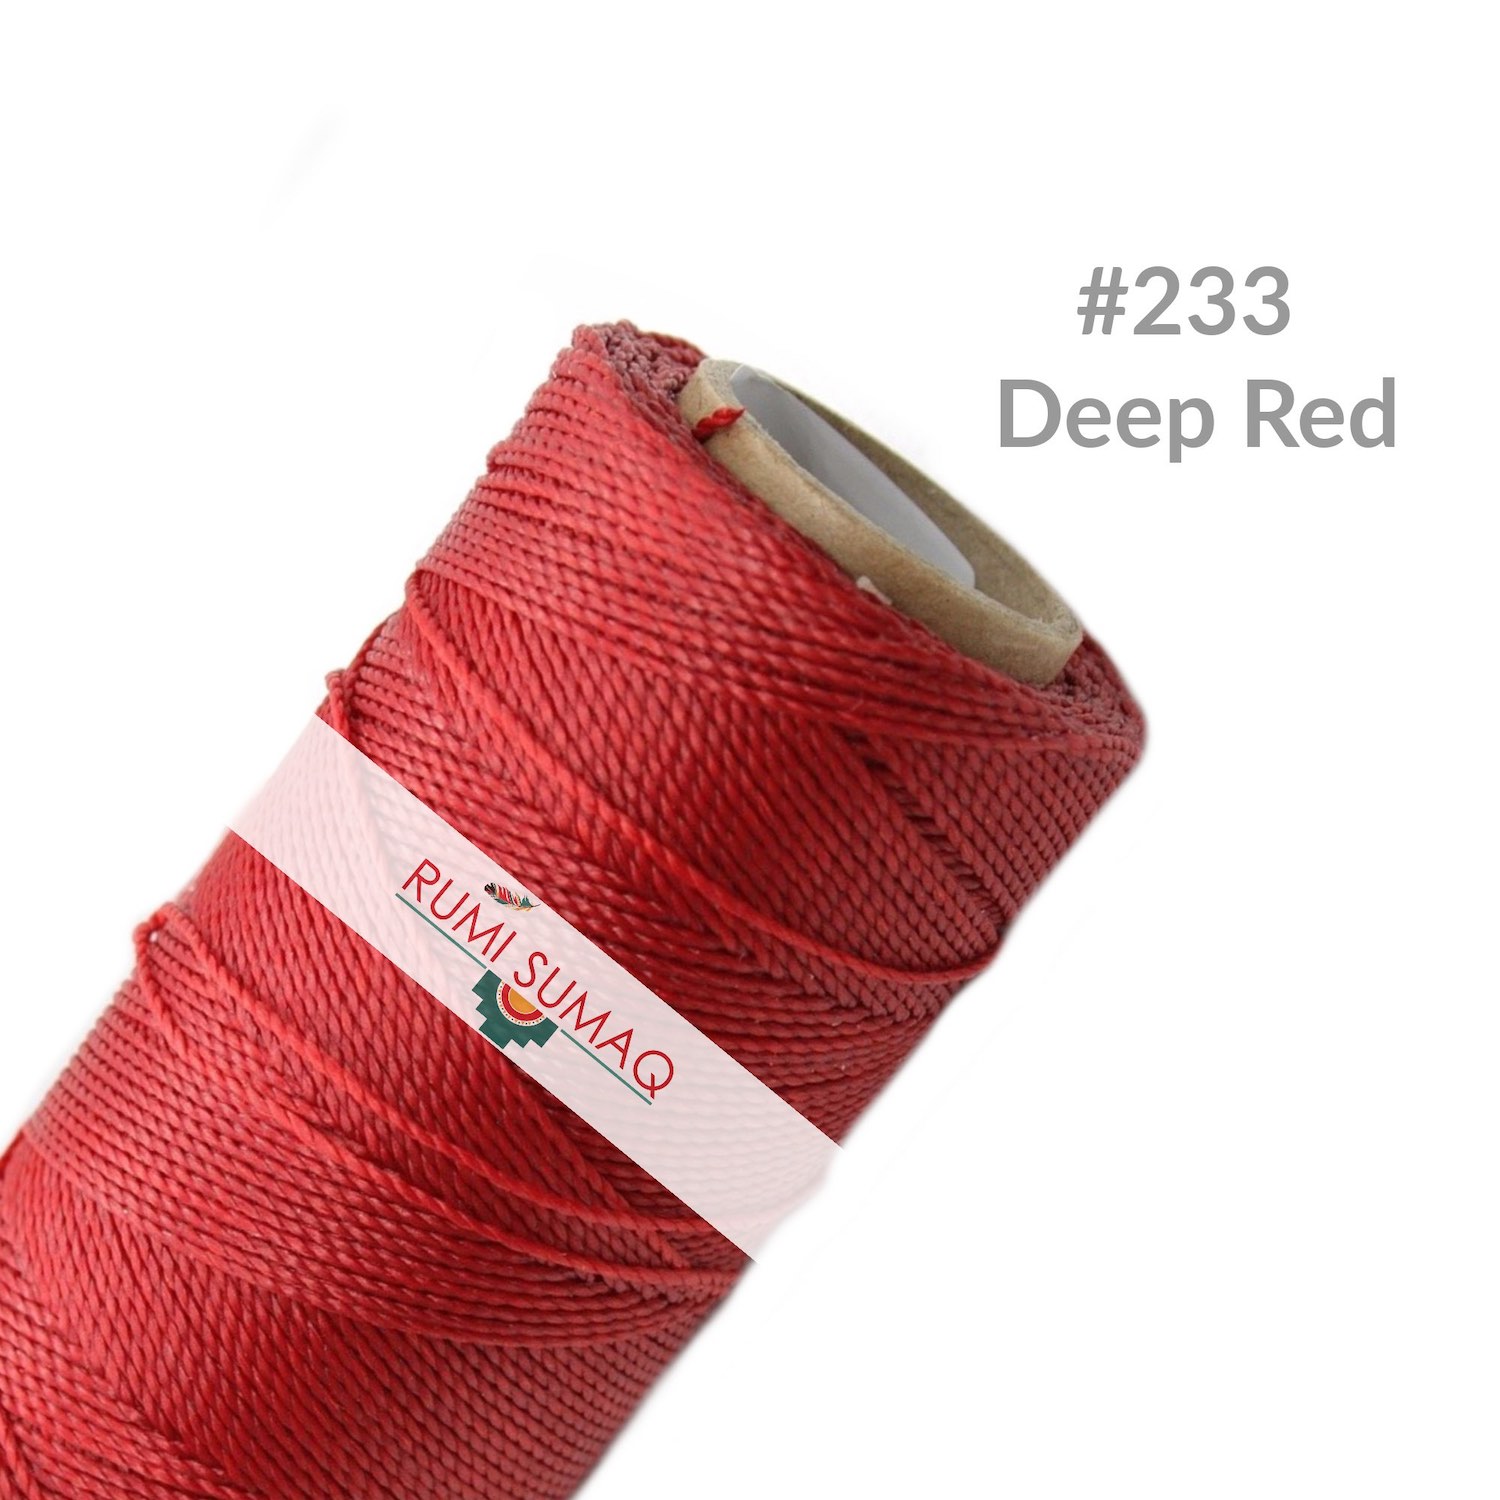 113 m 1,5 mm \u00d8 coil brand waxed thread LINHASITA 30 colors to choose from.